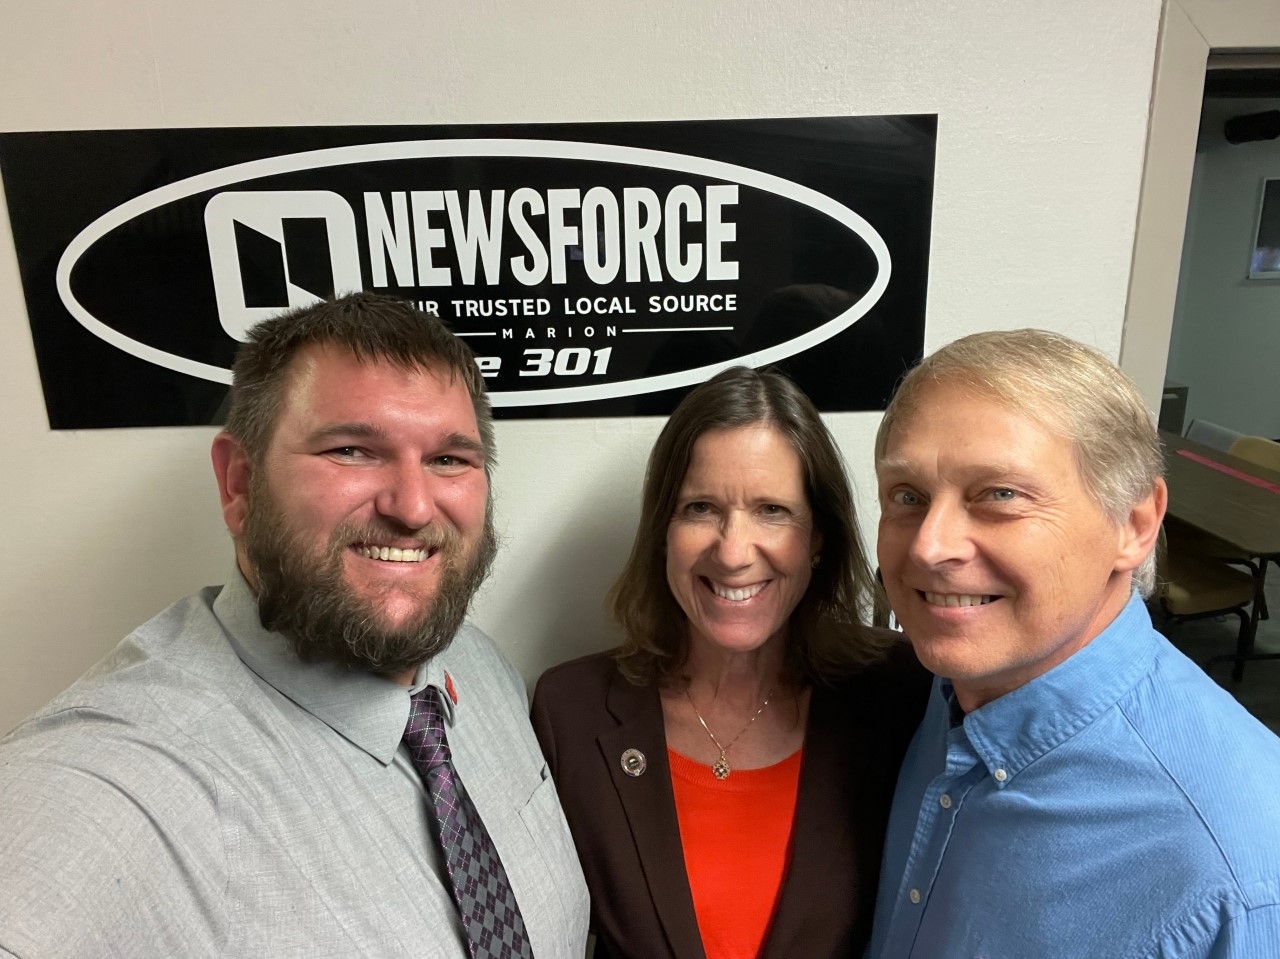 Representative Richardson enjoyed spending time with Zac Fuller and the NewsForce team at their ribbon cutting.